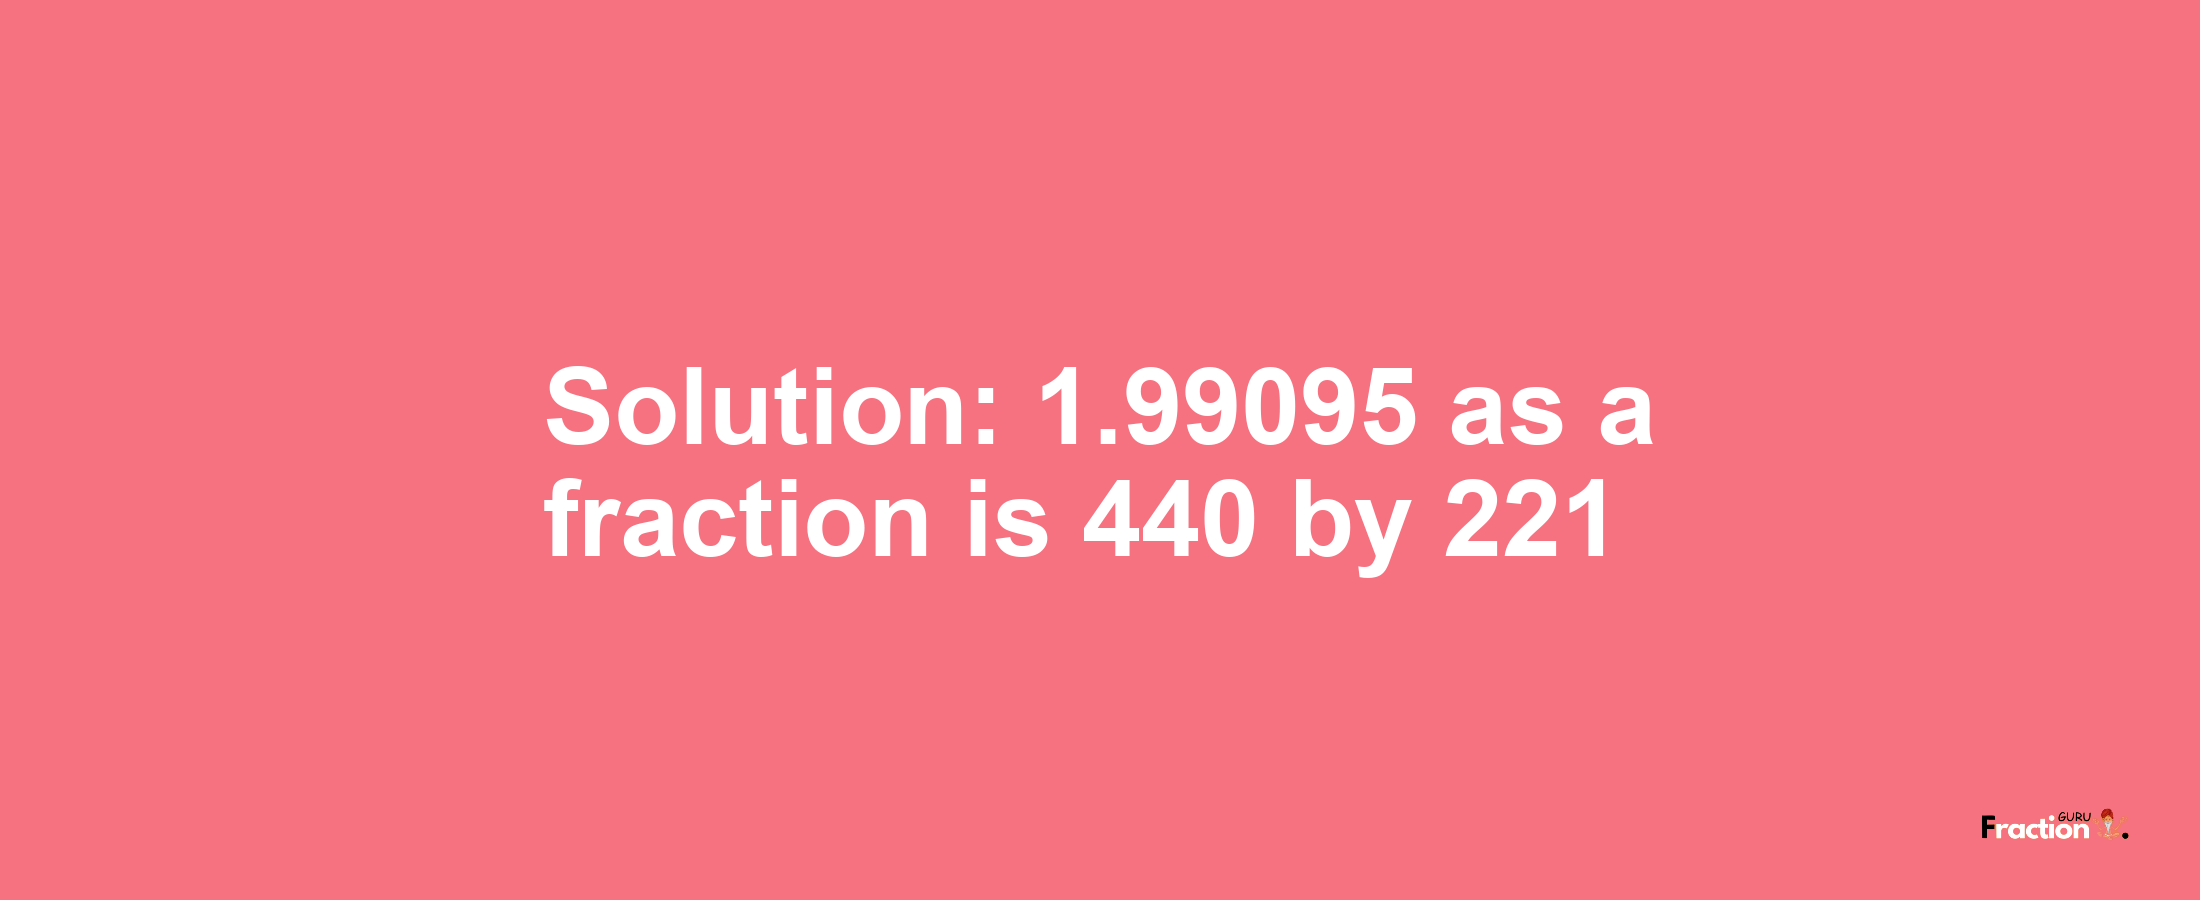 Solution:1.99095 as a fraction is 440/221